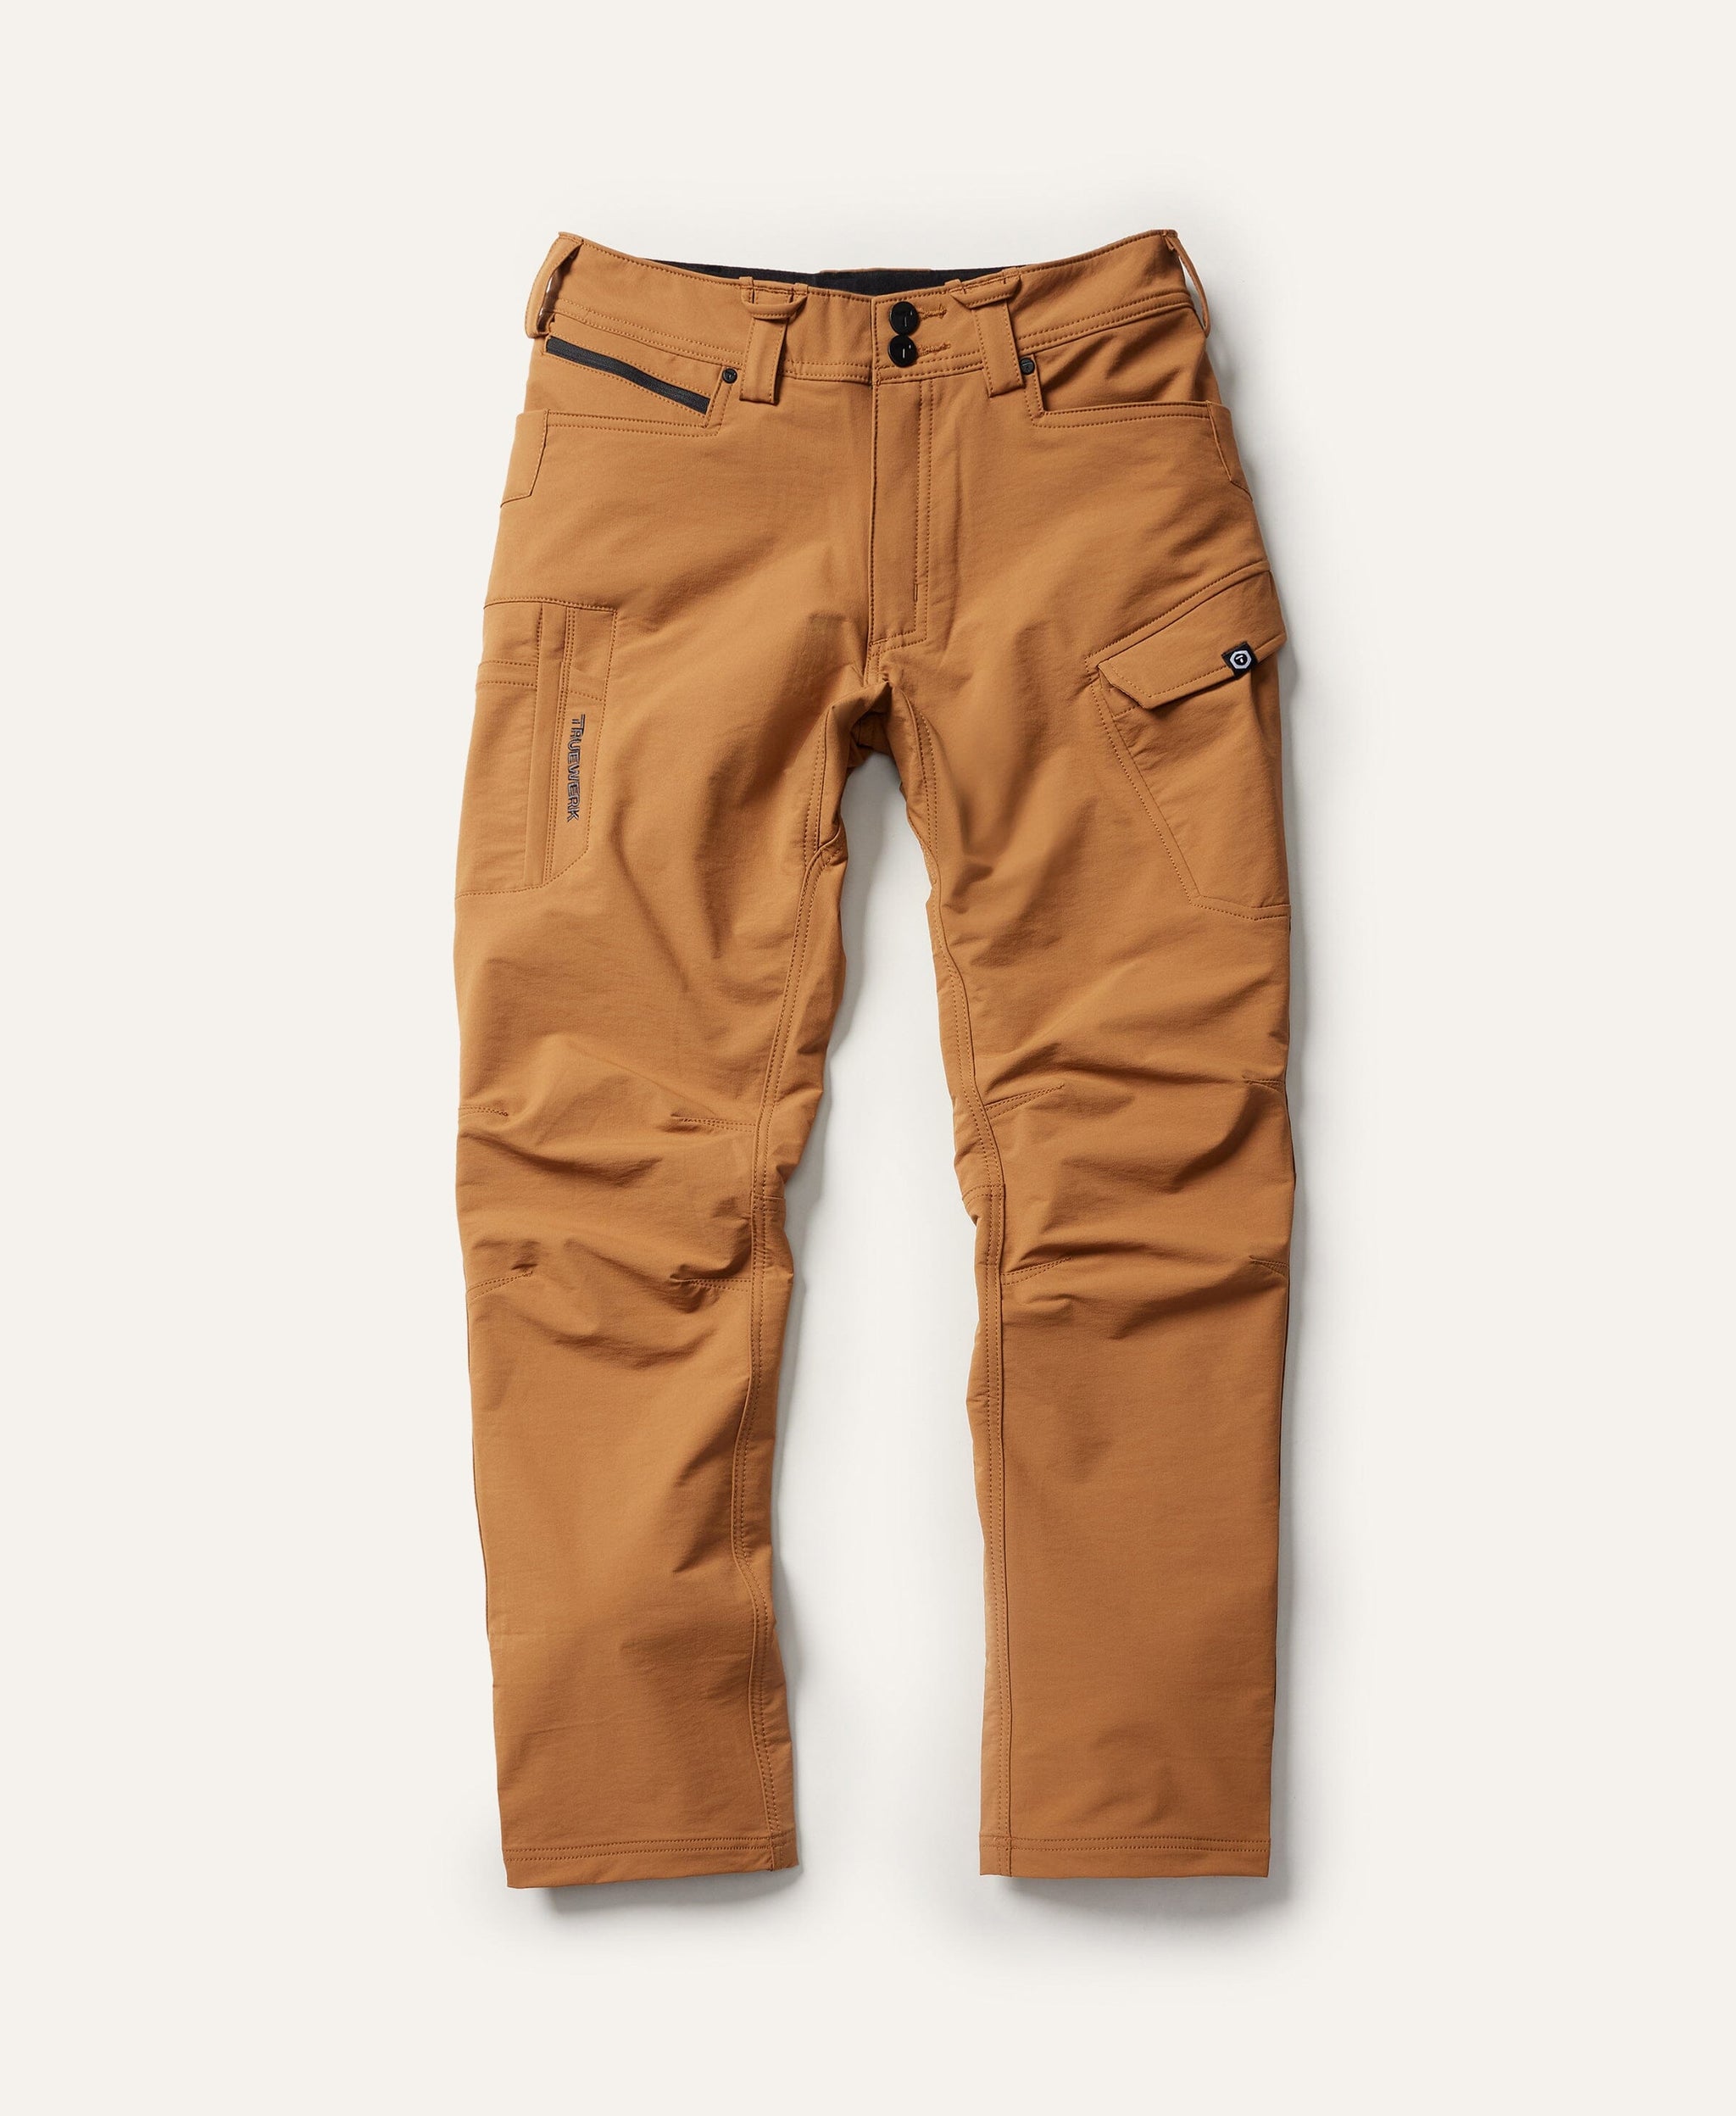 Guide Gear Outdoor 2.0 Flannel-Lined Cotton Cargo Pants, Khaki